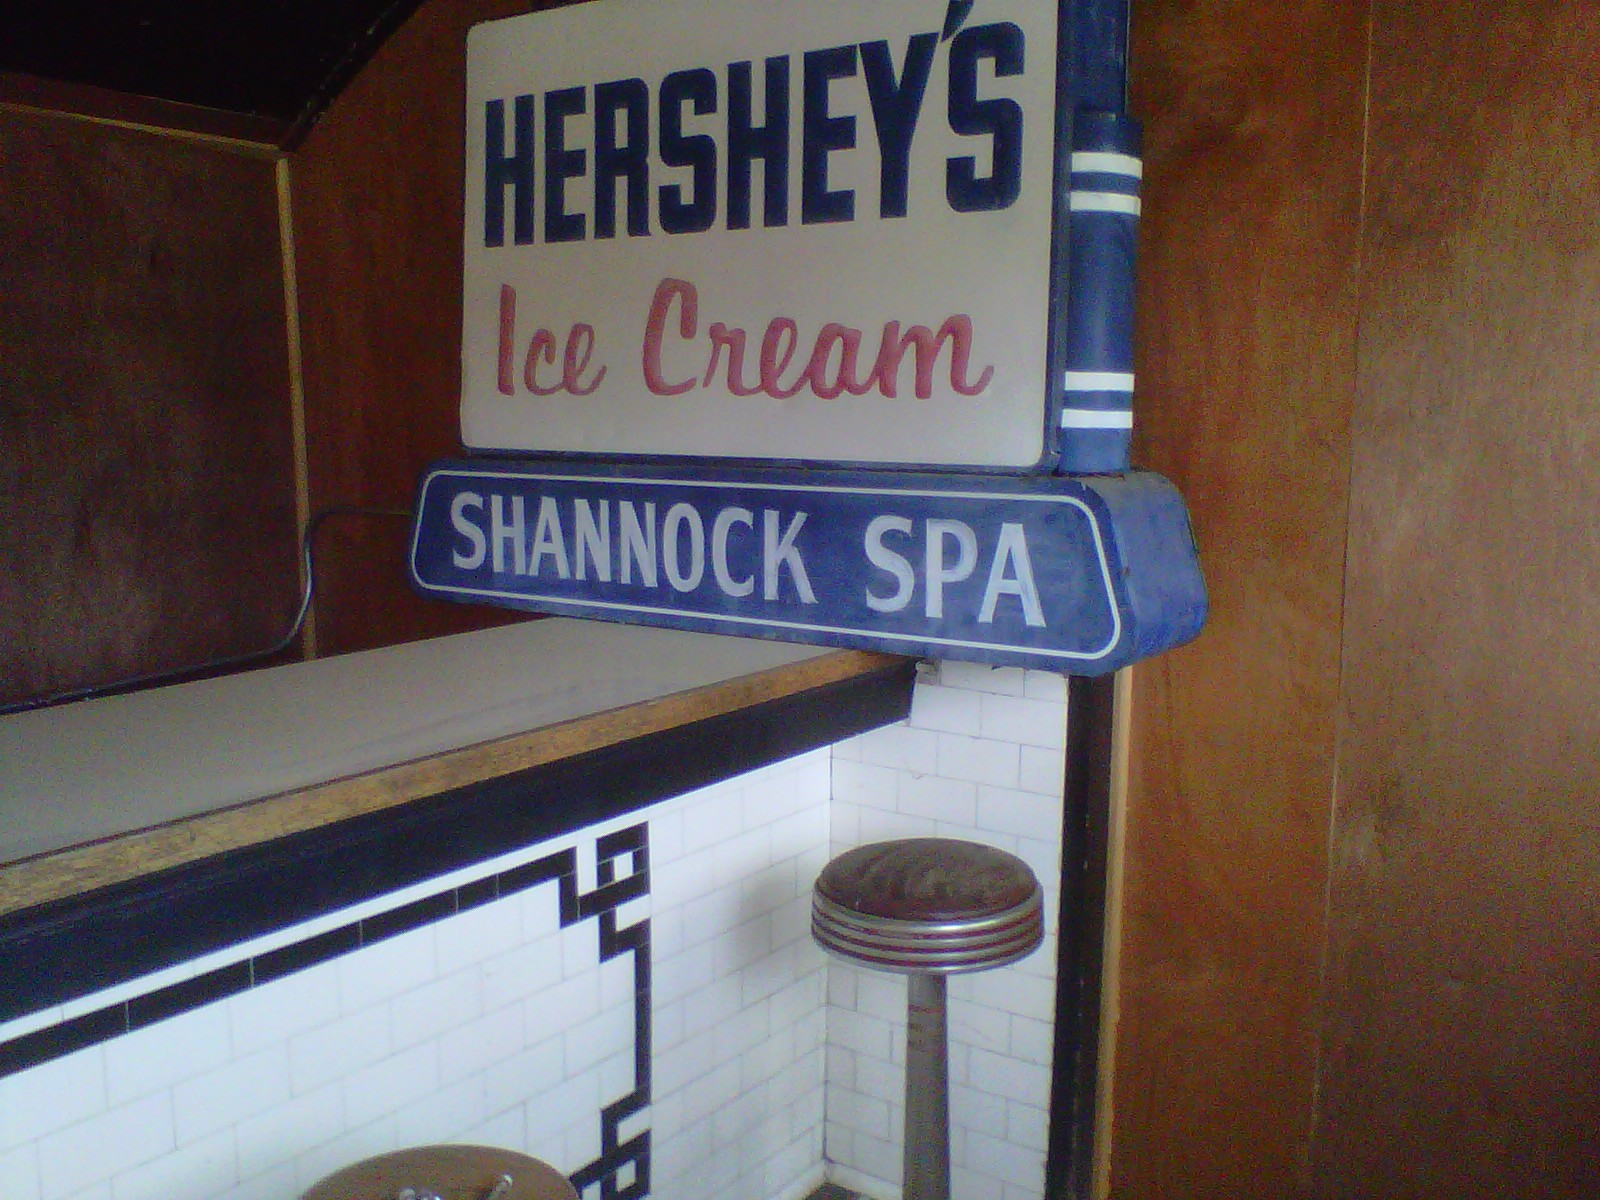 Shannock Spa - Sign and Stool